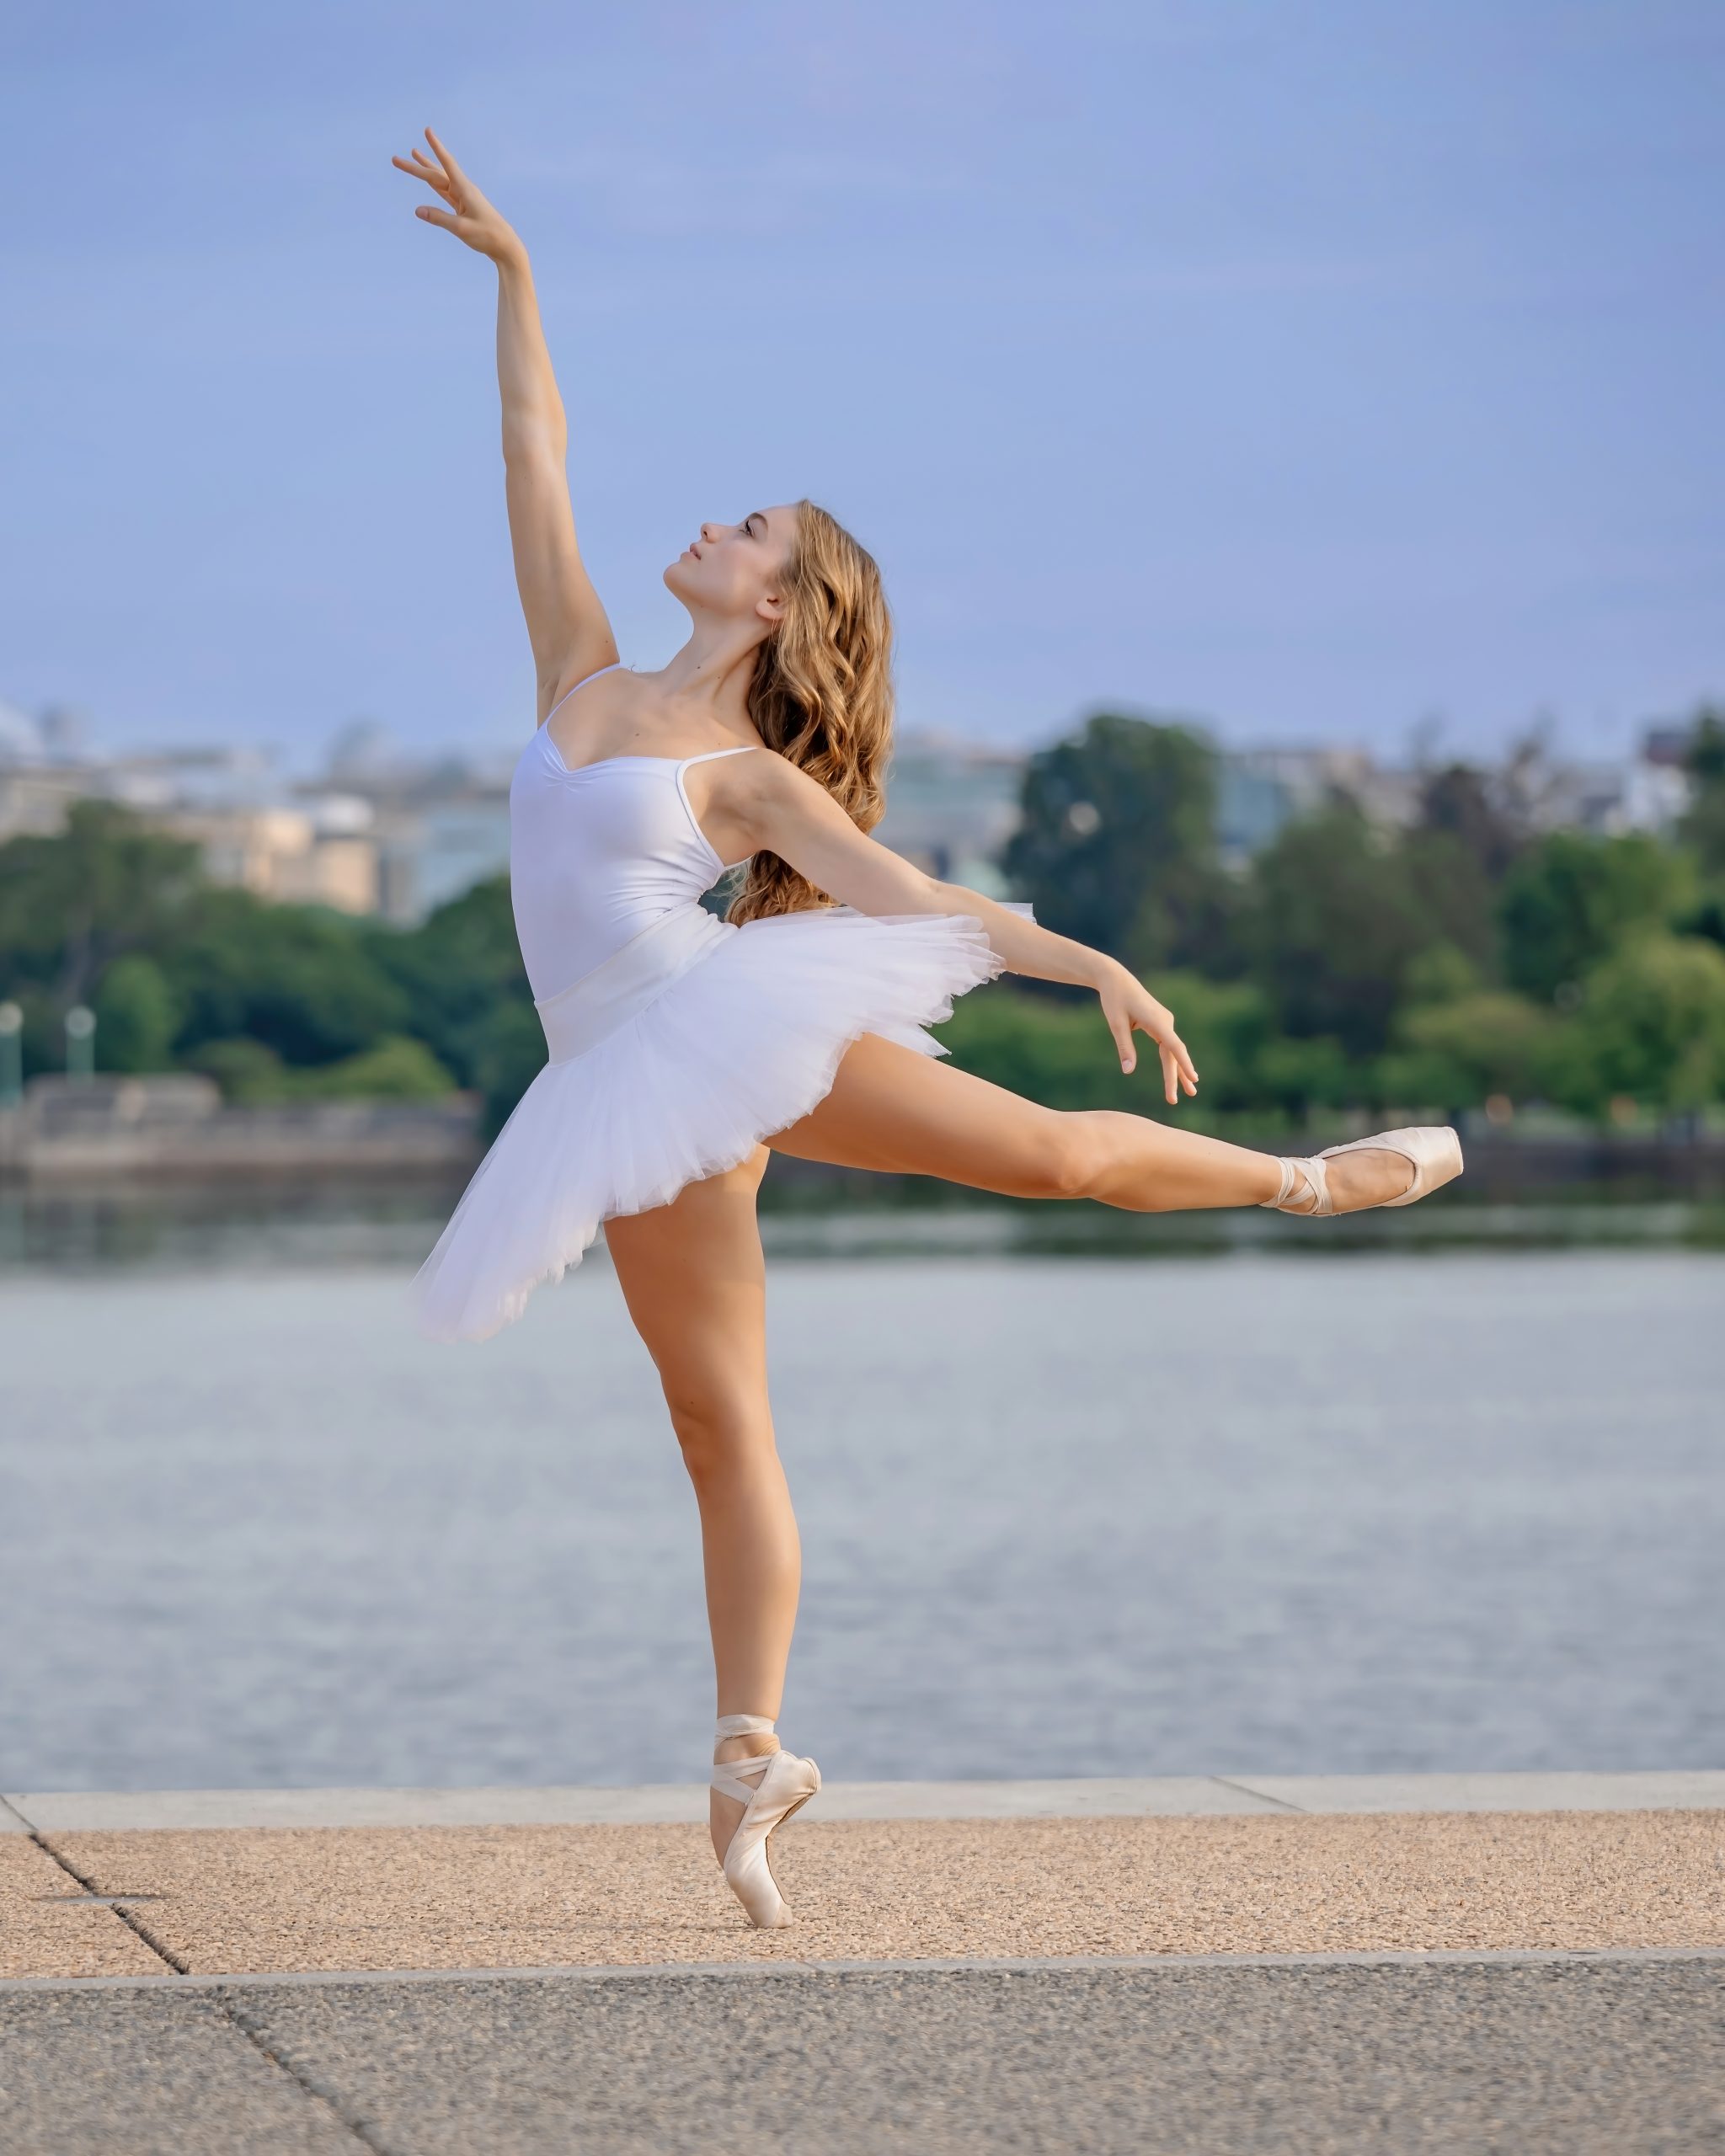 R-Class pointe shoes ambassador search image 1